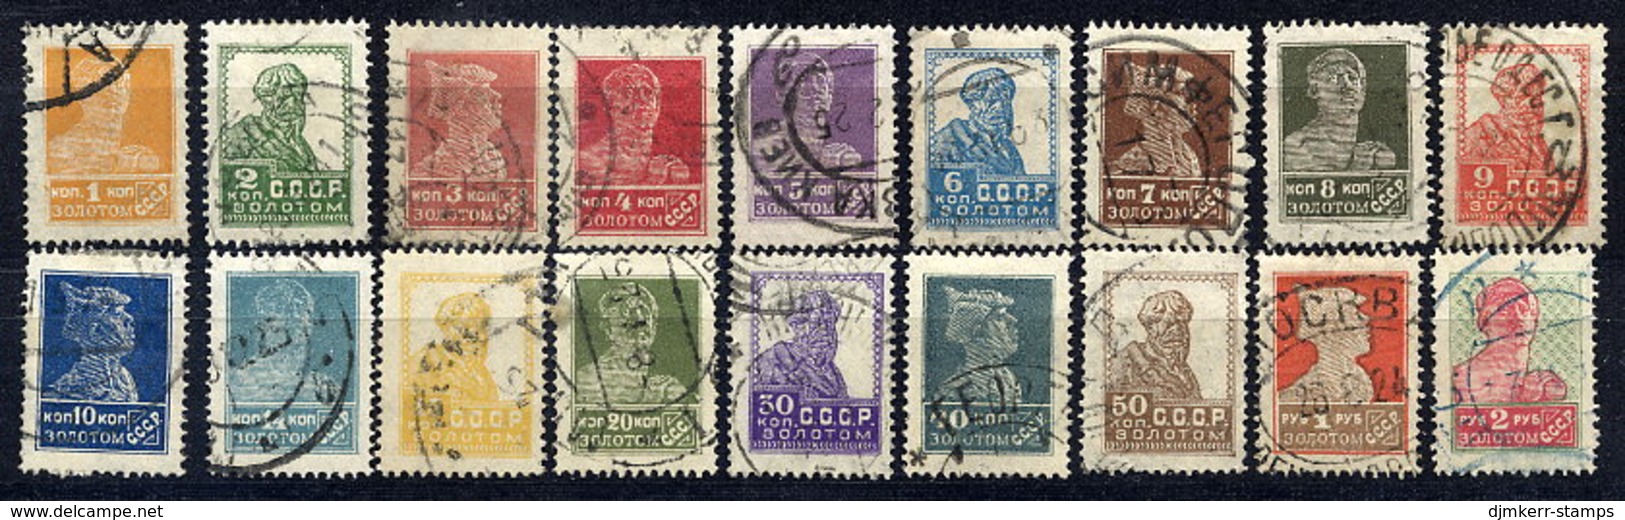 SOVIET UNION 1924-25 Definitive Complete To 2 R. Without Watermark Perforated 14½:14¾, Used.  Michel 242 I A - 259 I A. - Gebraucht